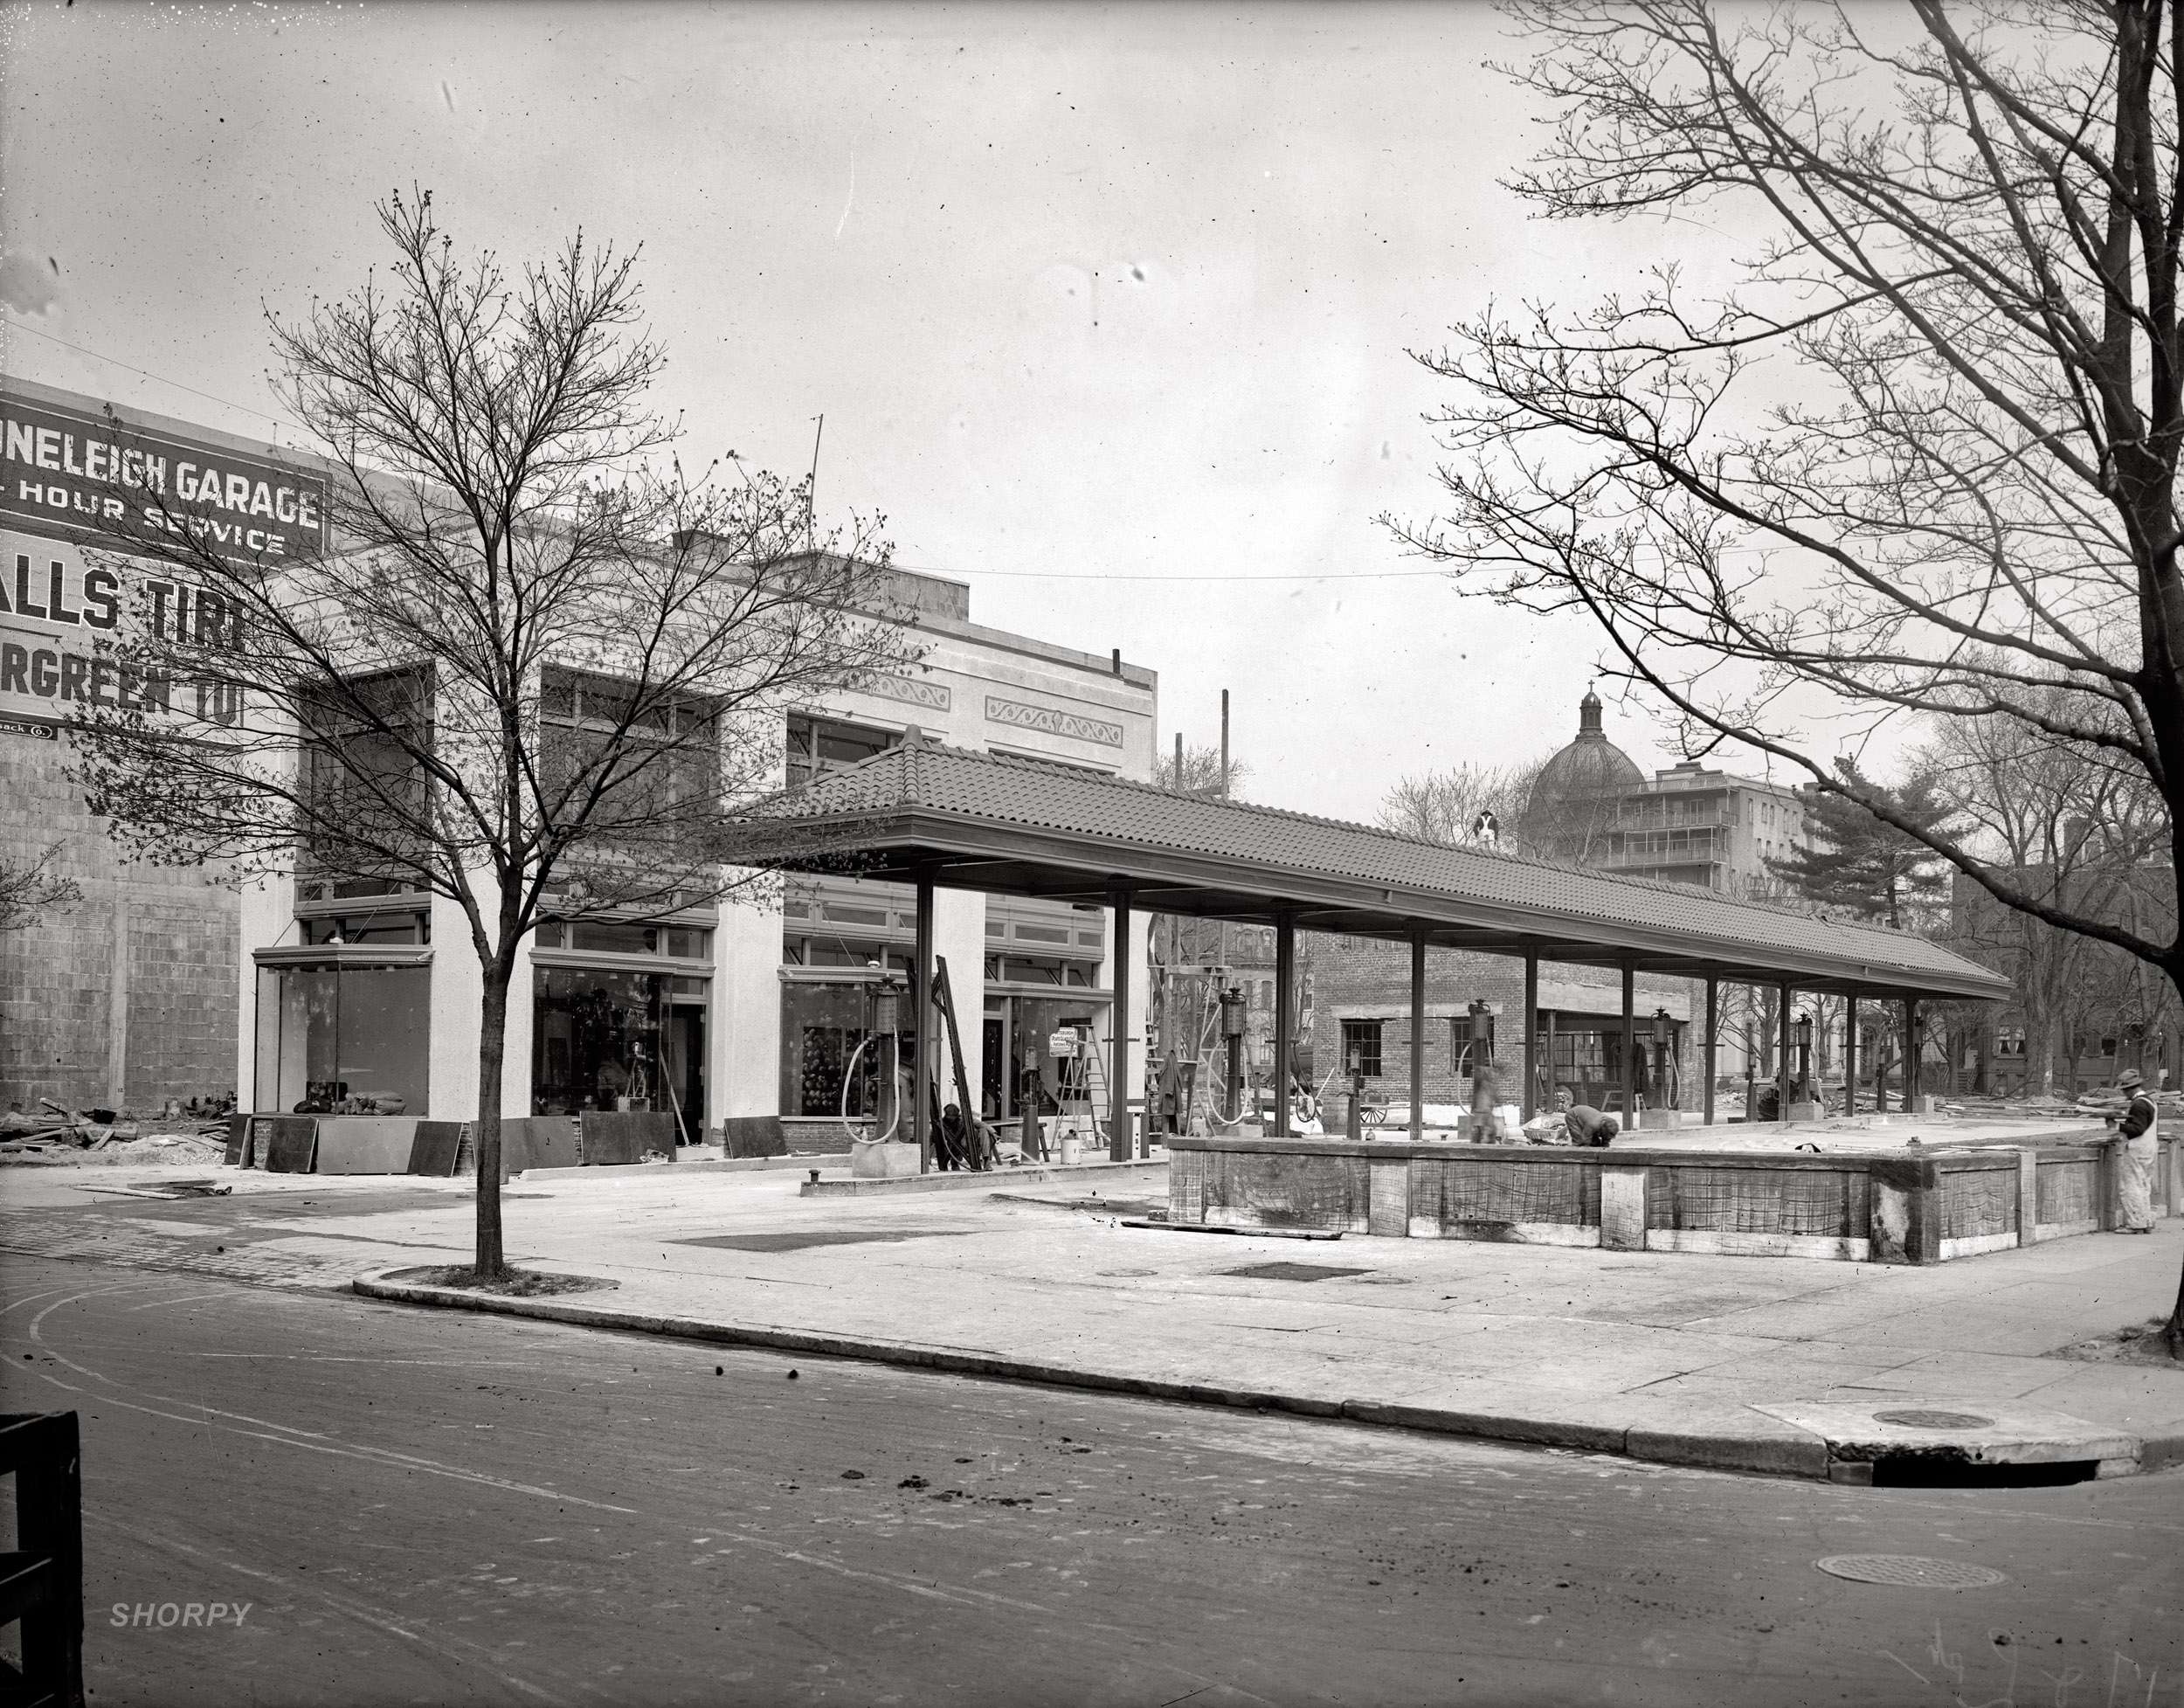 "Filling station, 17th & L." The Washington Accessories Co. service station under construction at 1703 L Street N.W. in early 1922 next to the Stoneleigh Garage. National Photo Company Collection glass negative. View full size.